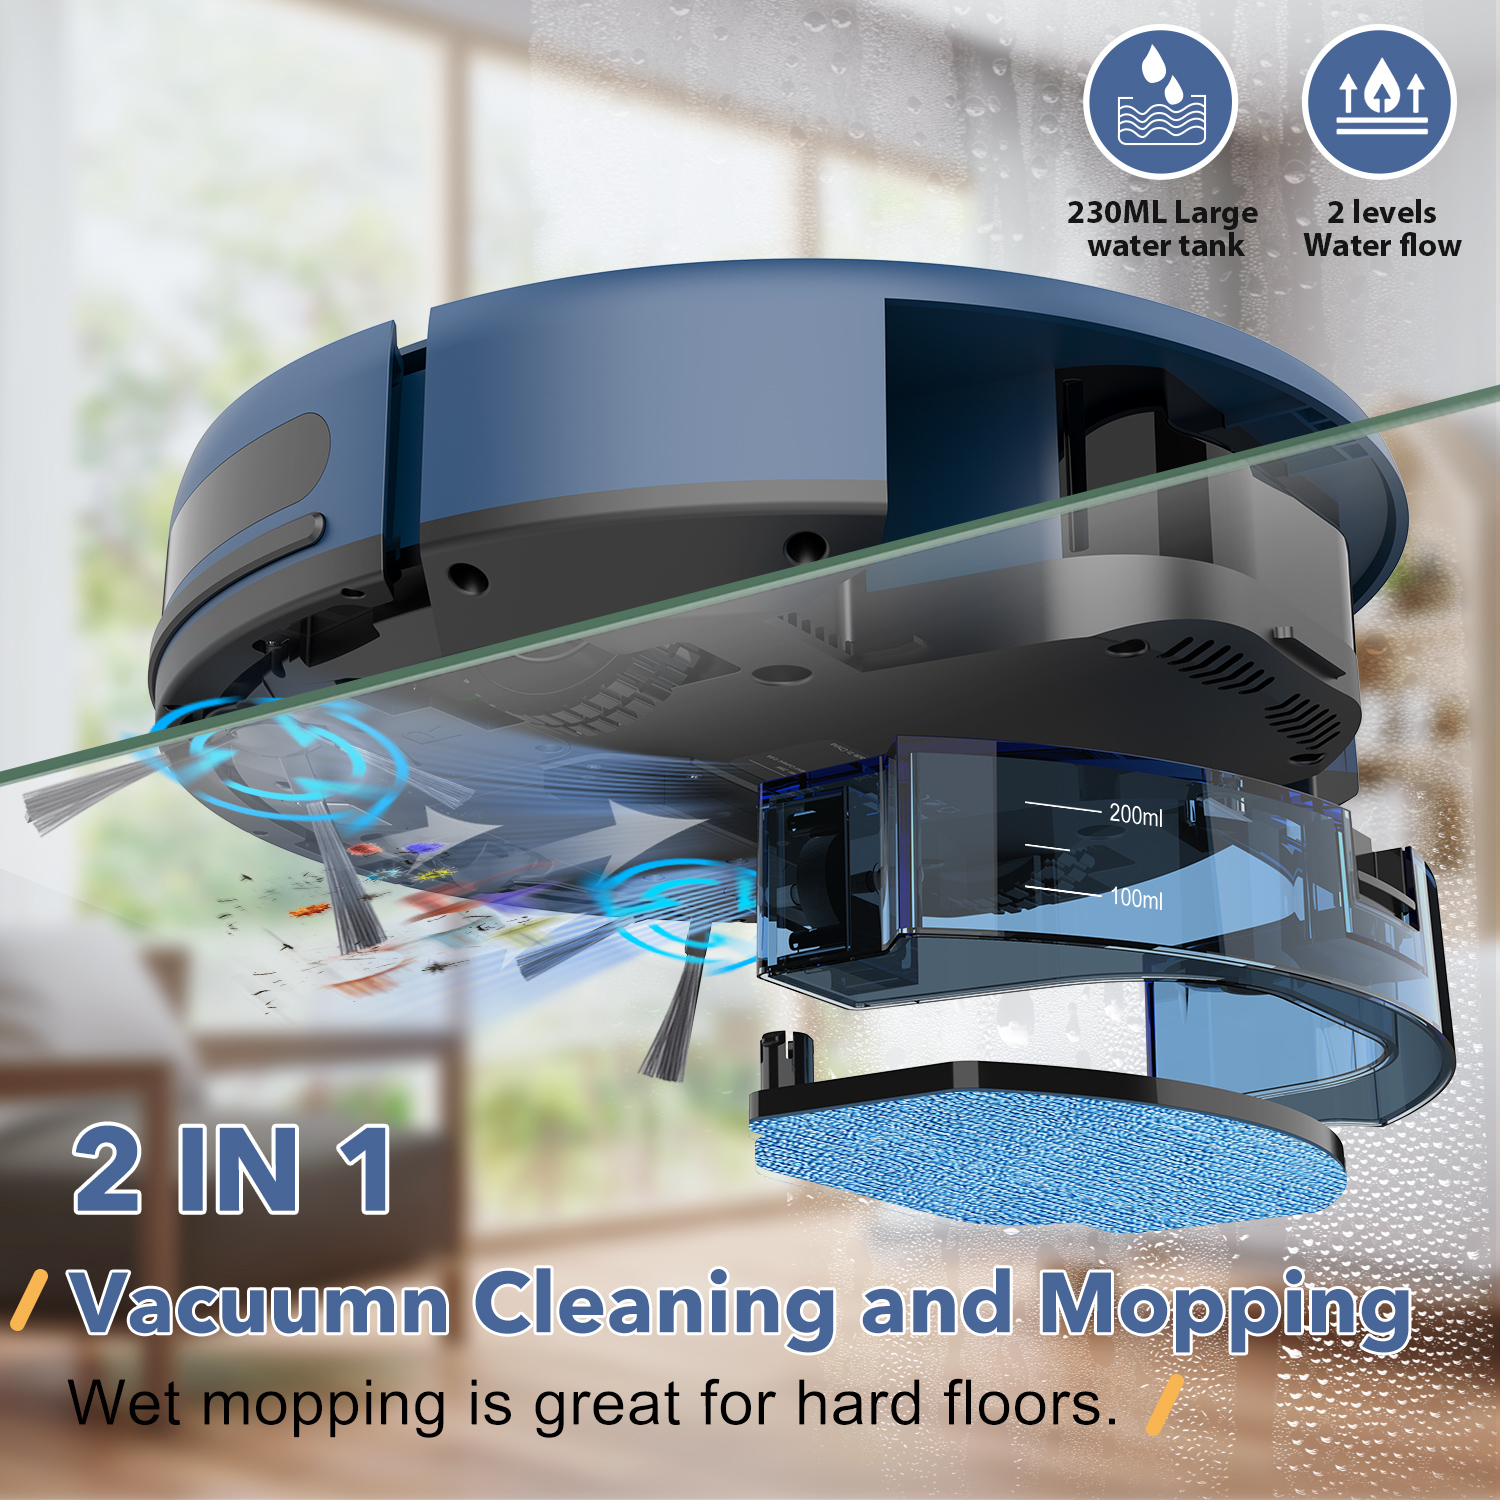 ONSON Robot Vacuum Cleaner, Robot Vacuum and Mop Combo with WIFI / Alexa for Pet Hair and Hard Floor - image 4 of 9